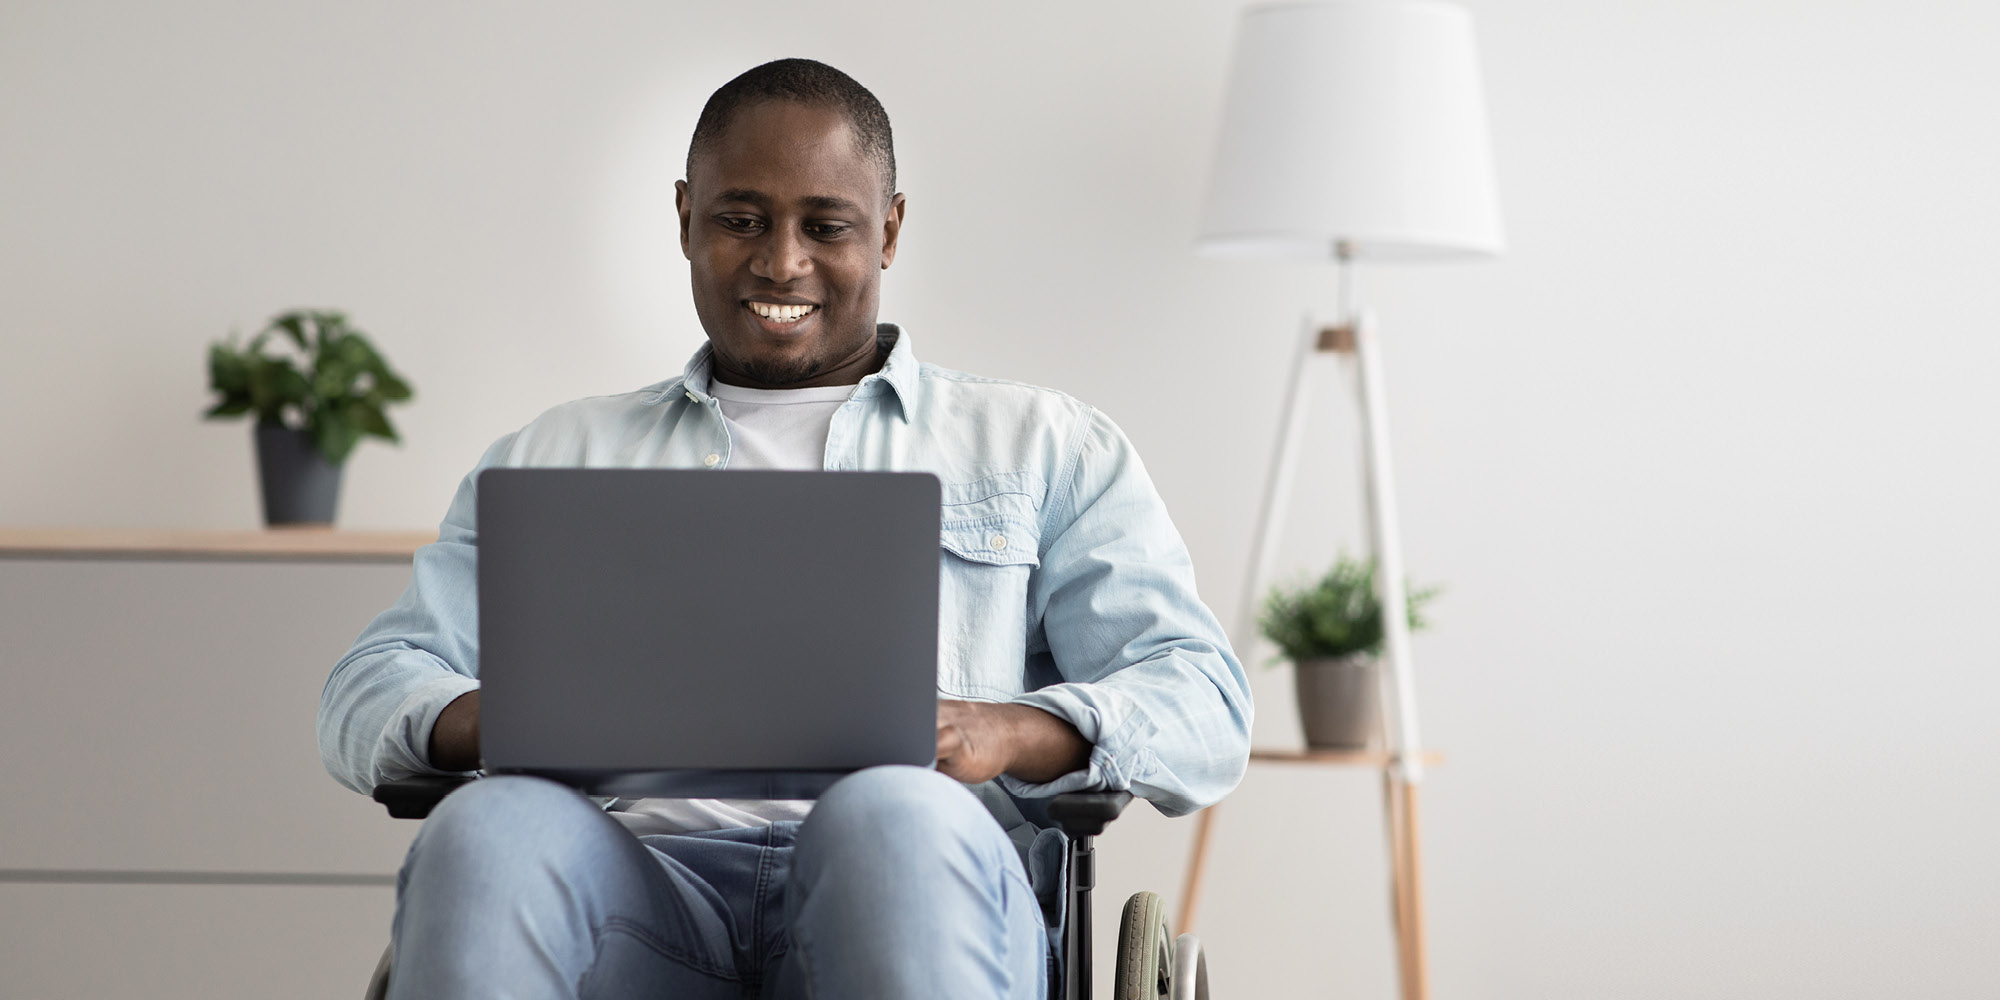 Student smiling on laptop